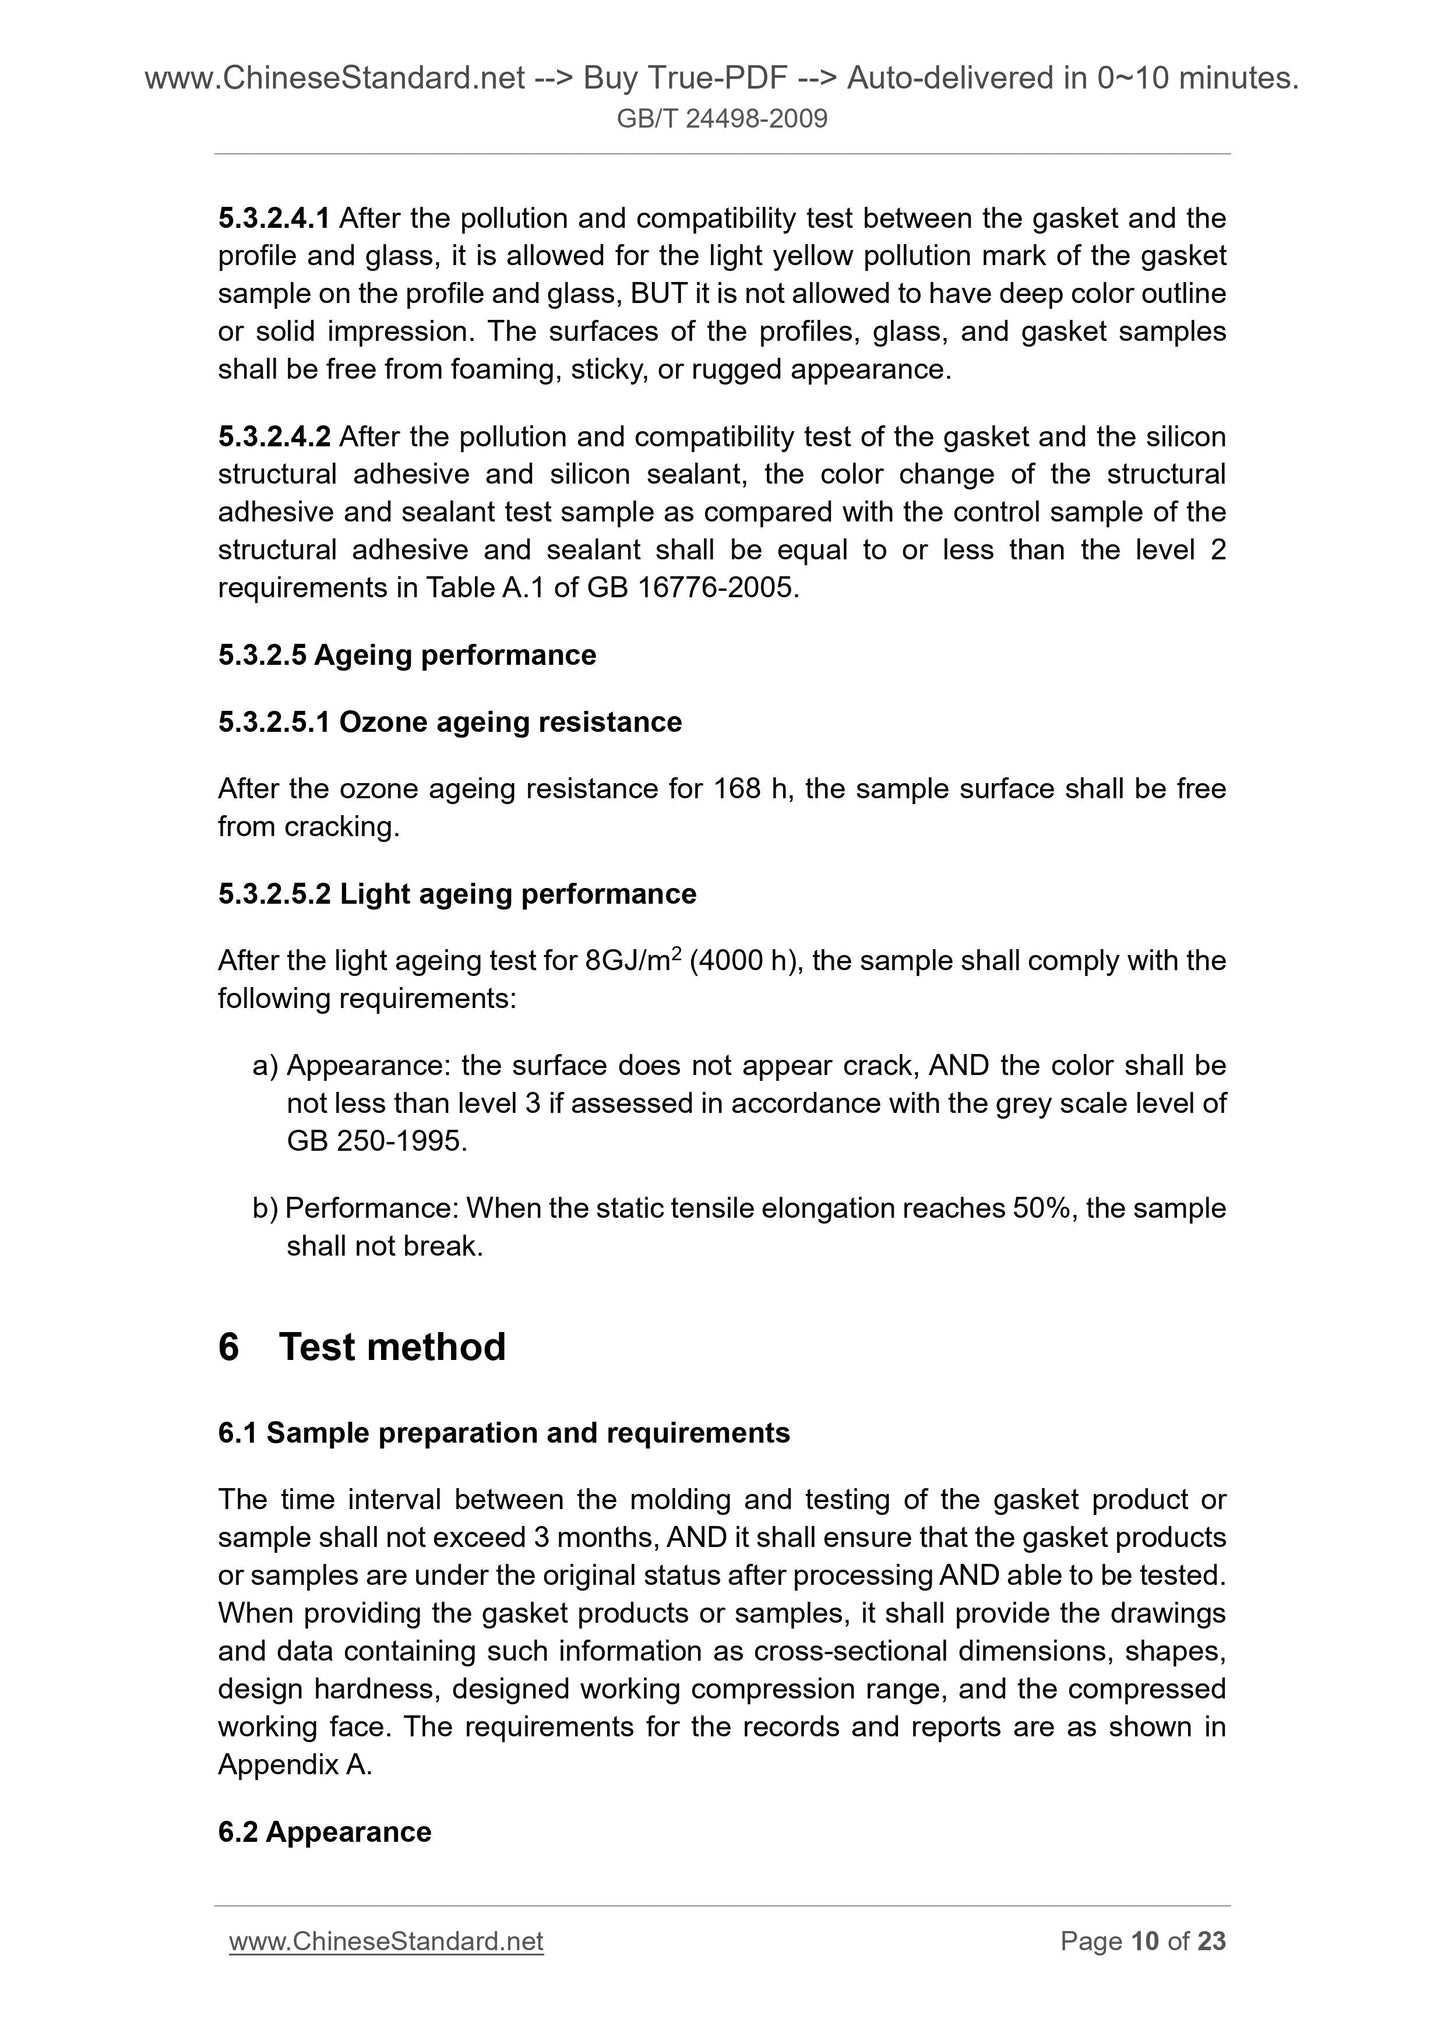 GB/T 24498-2009 Page 6